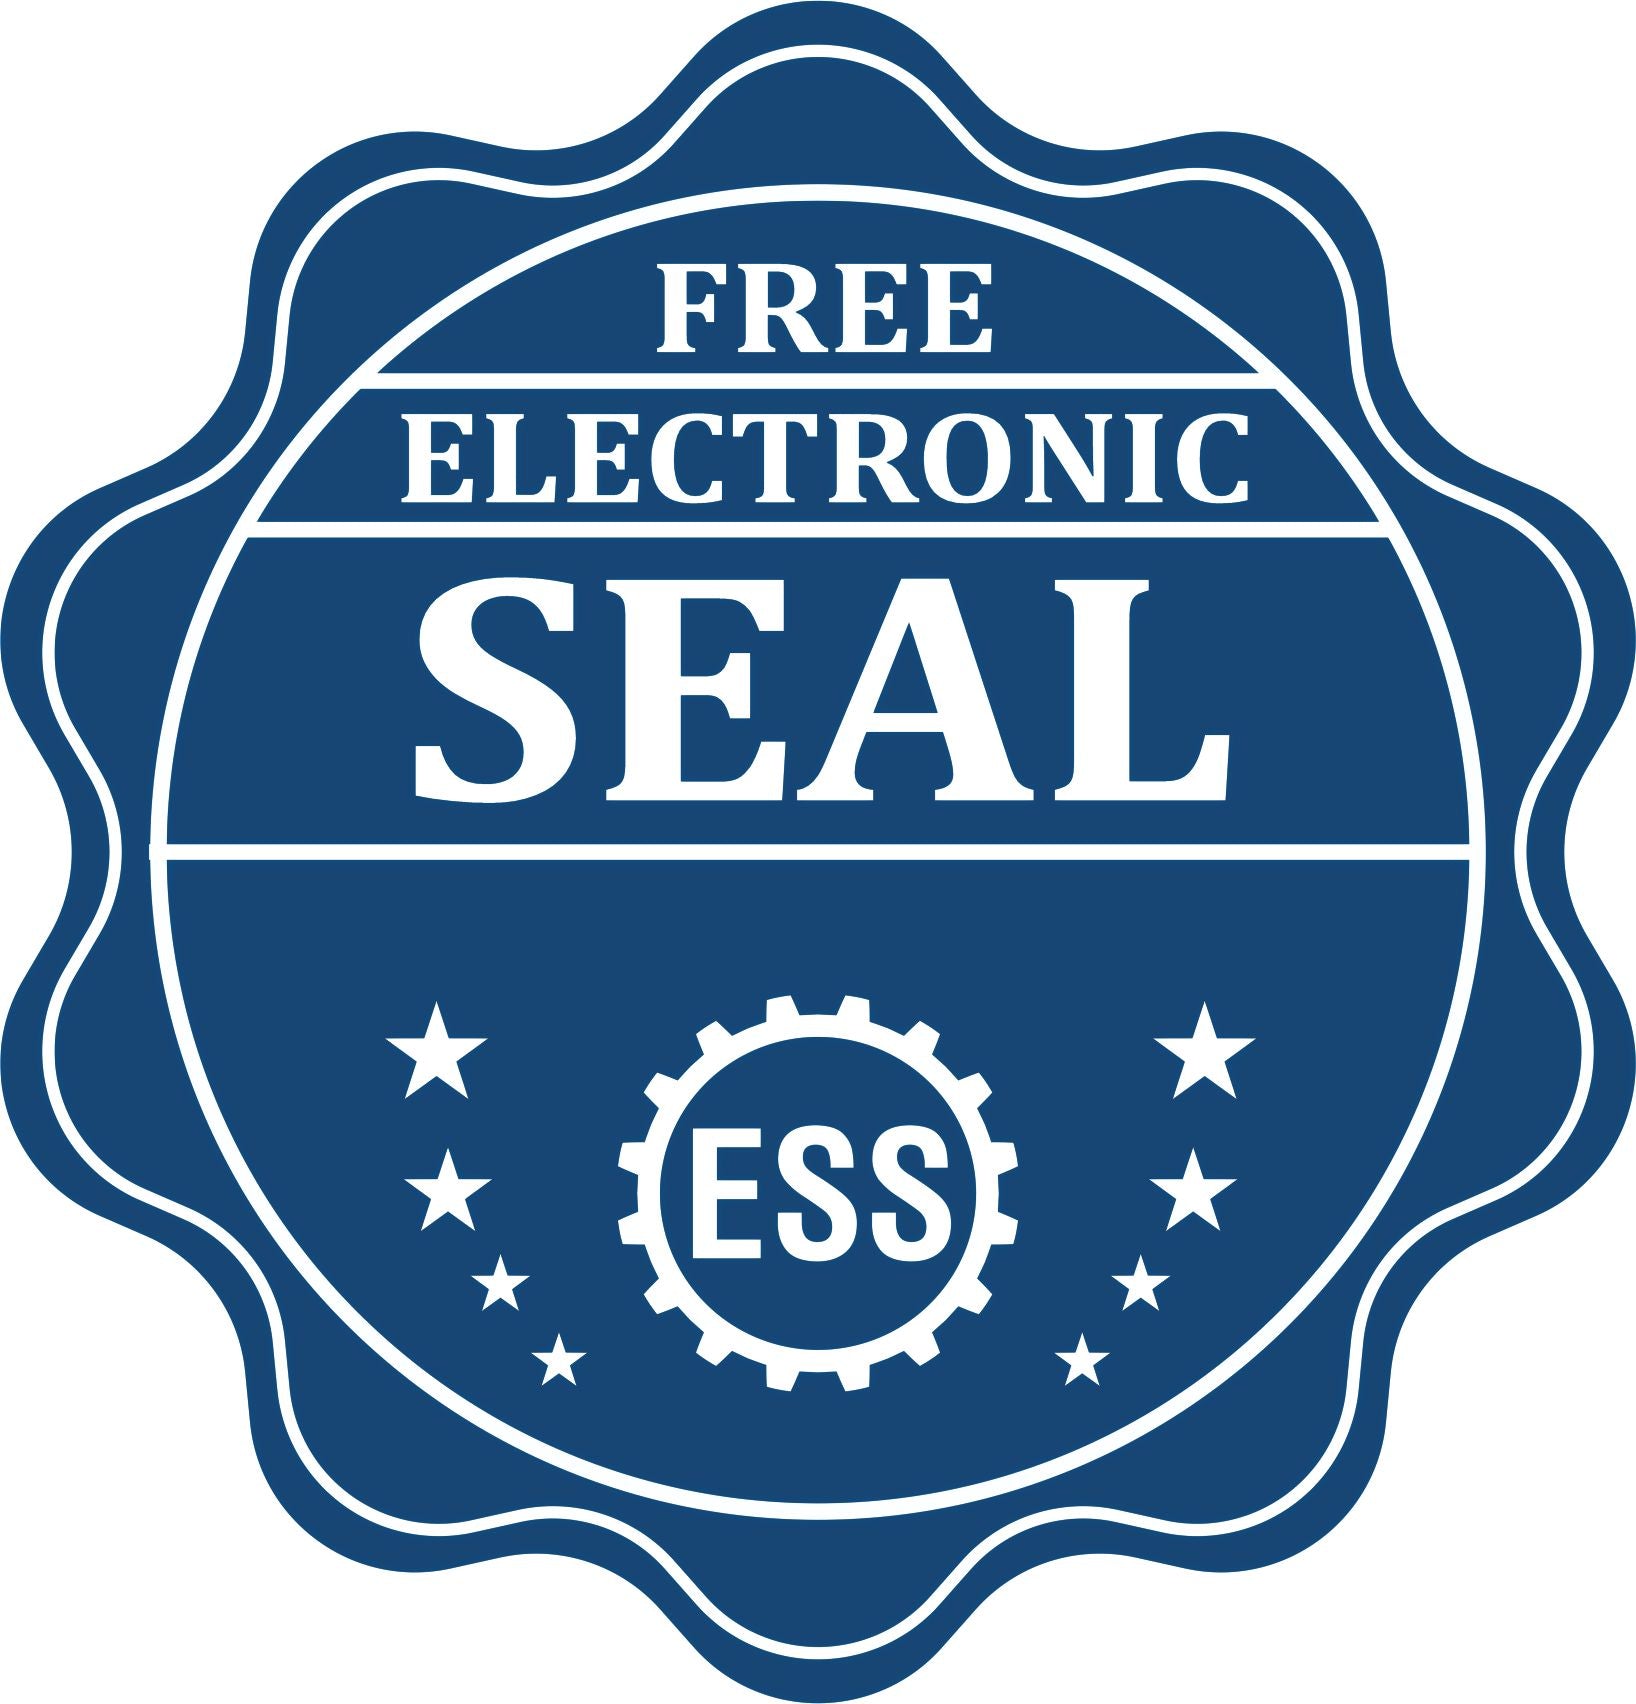 A badge showing a free electronic seal for the Idaho Desk Architect Embossing Seal with stars and the ESS gear on the emblem.